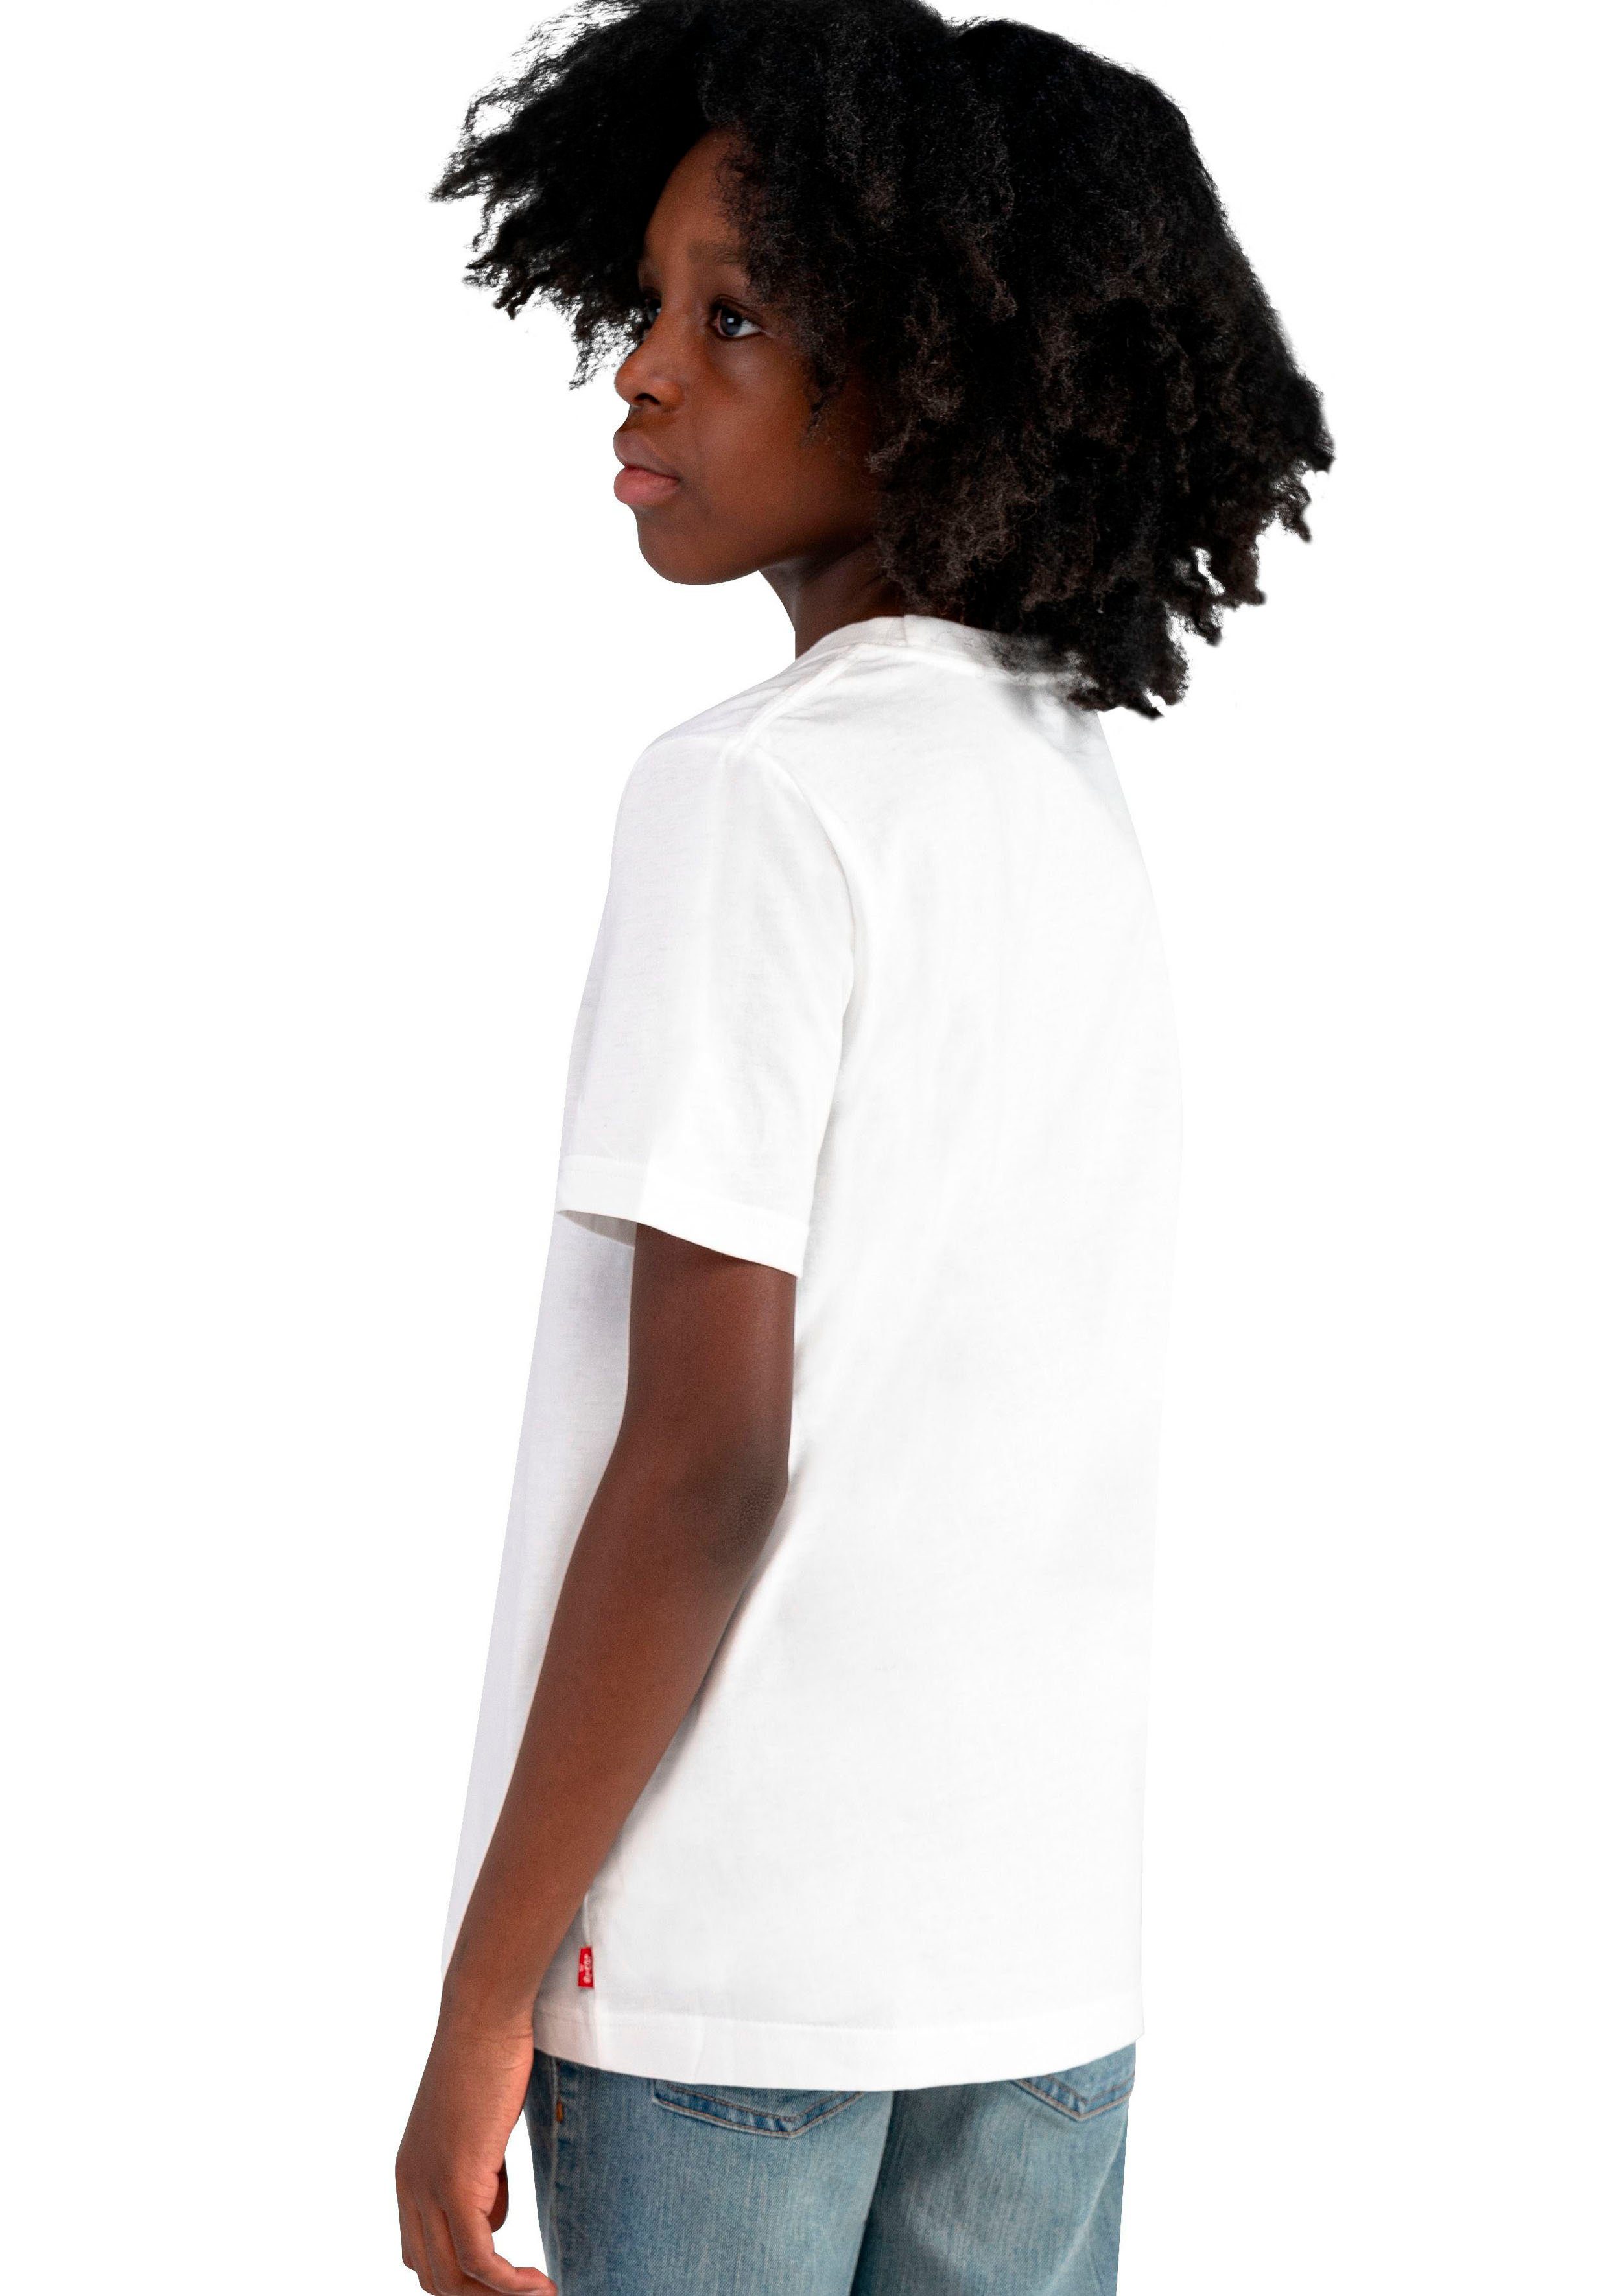 Levi's® Kids T-Shirt CHEST HIT BOYS BATWING white for